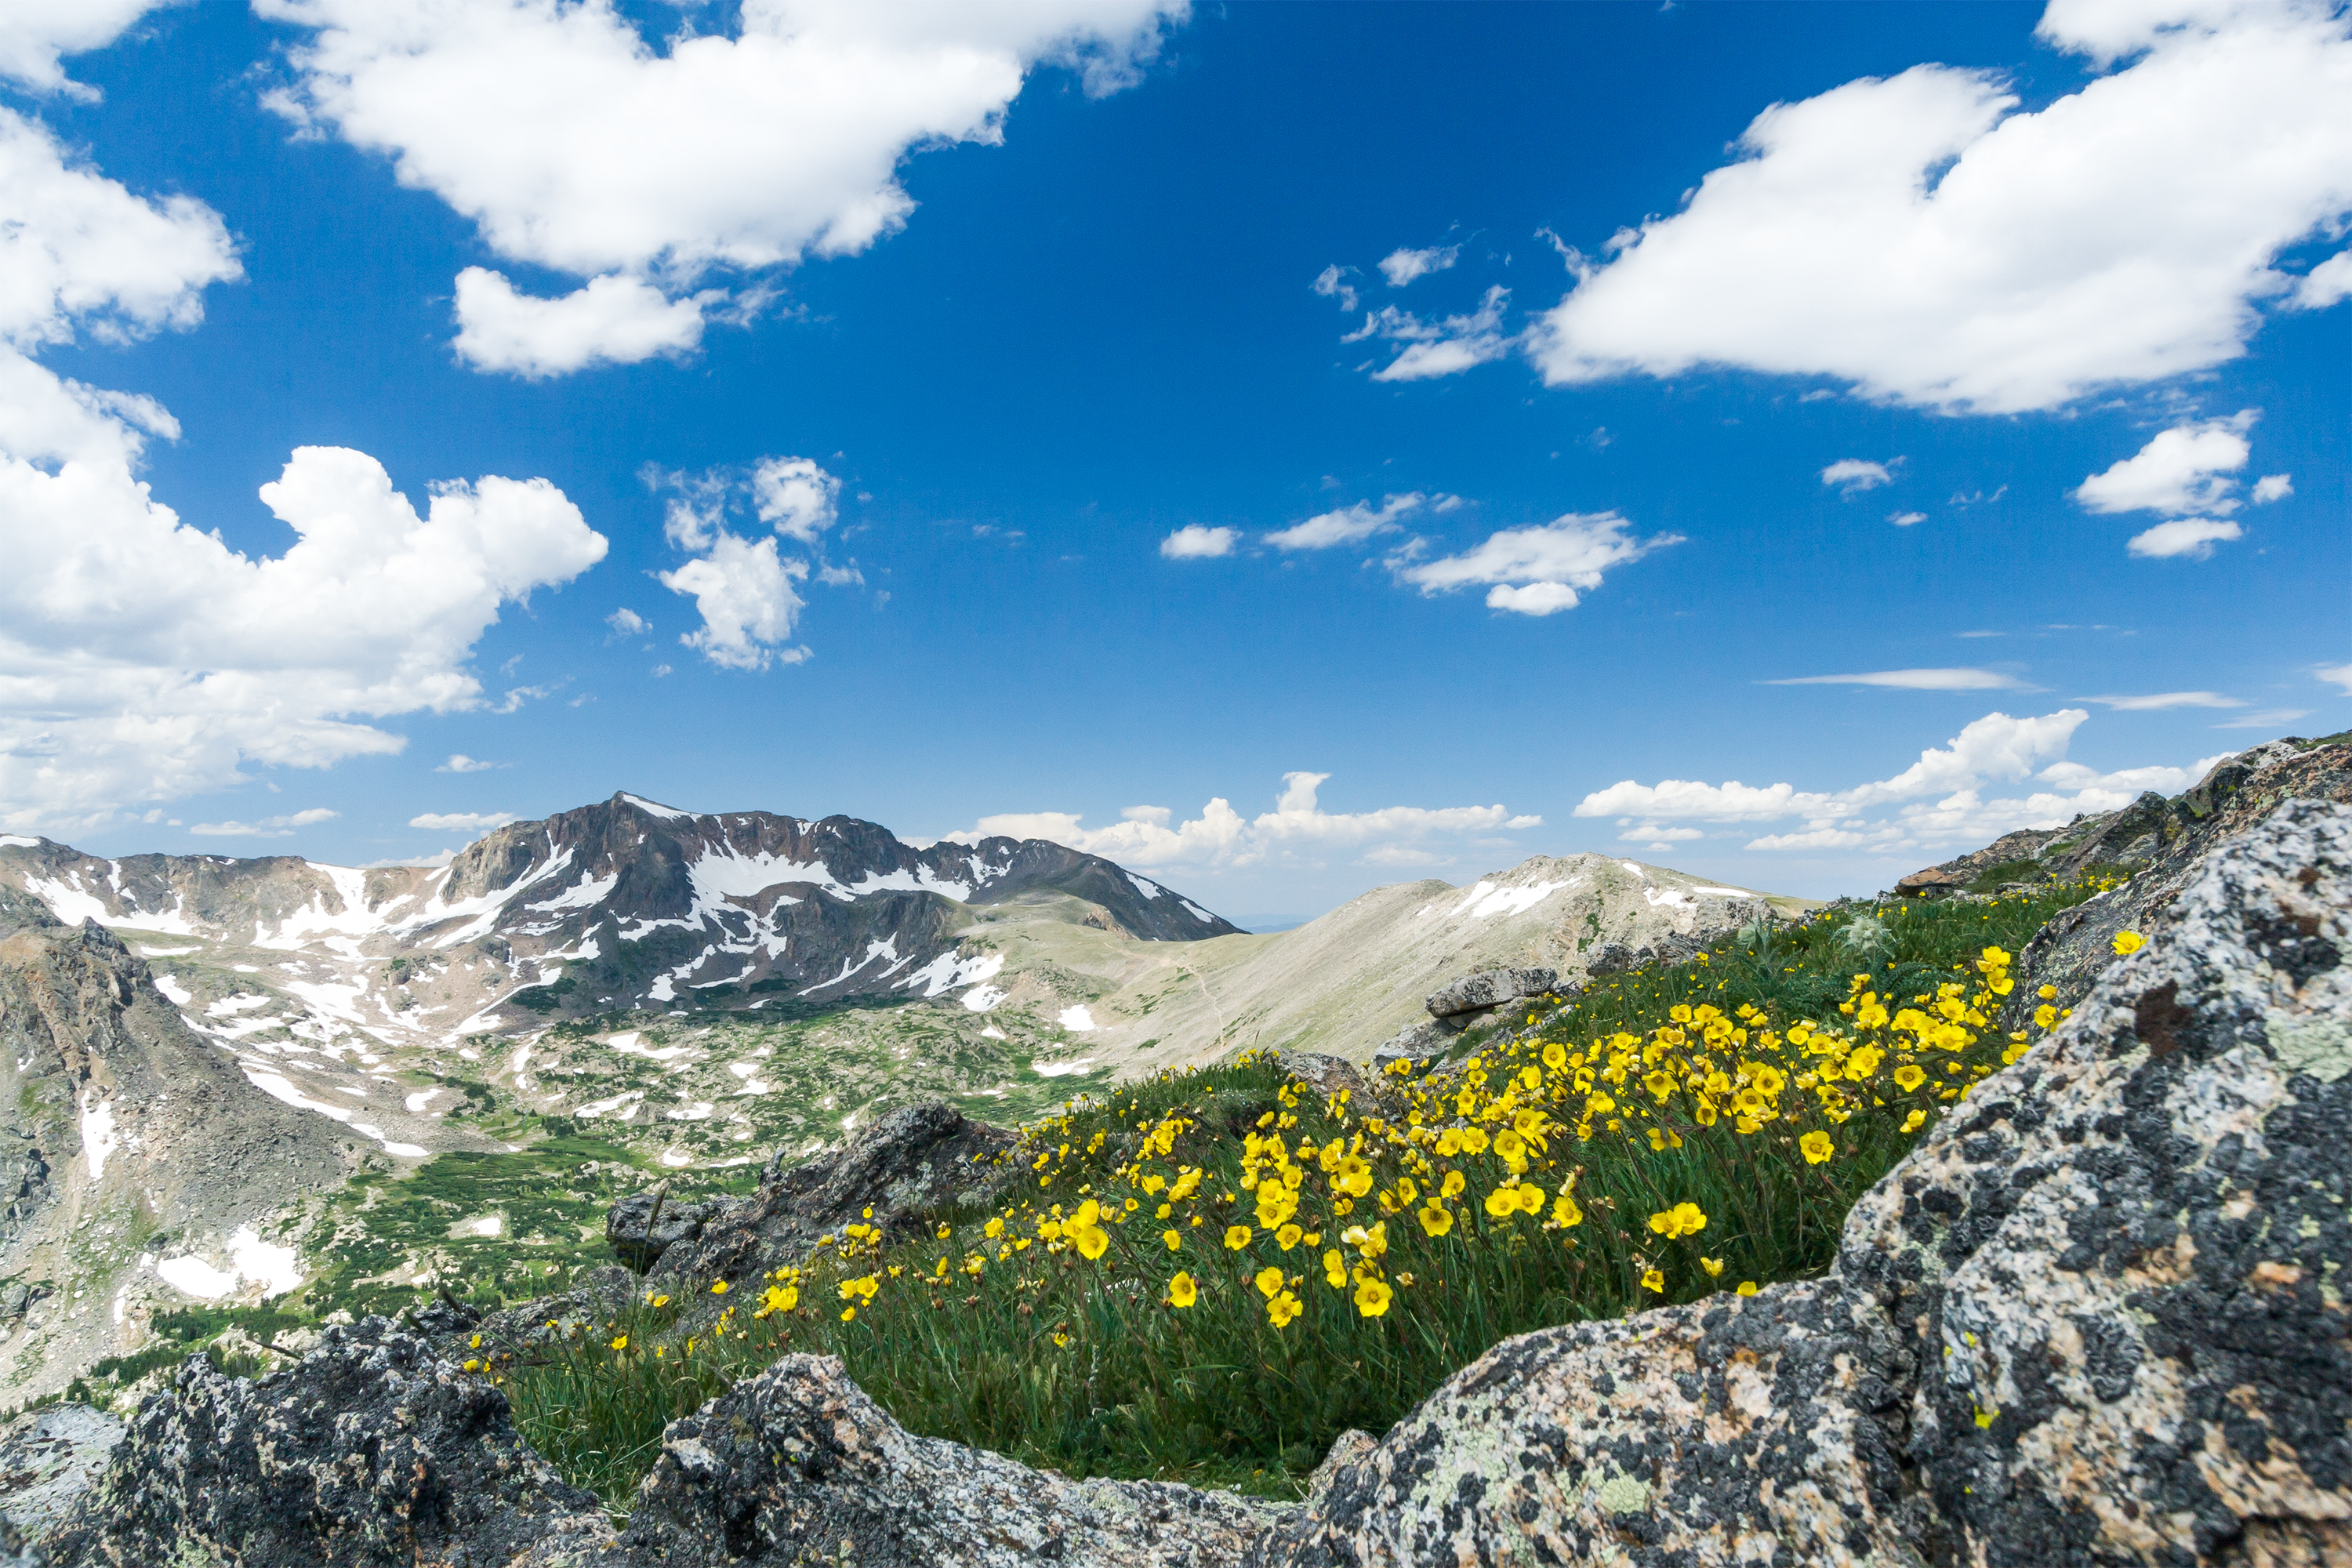 Wild flowers bloom along a trail in a colorful Colorado spring landscape on Arapahoe Pass in the Rocky Mountains